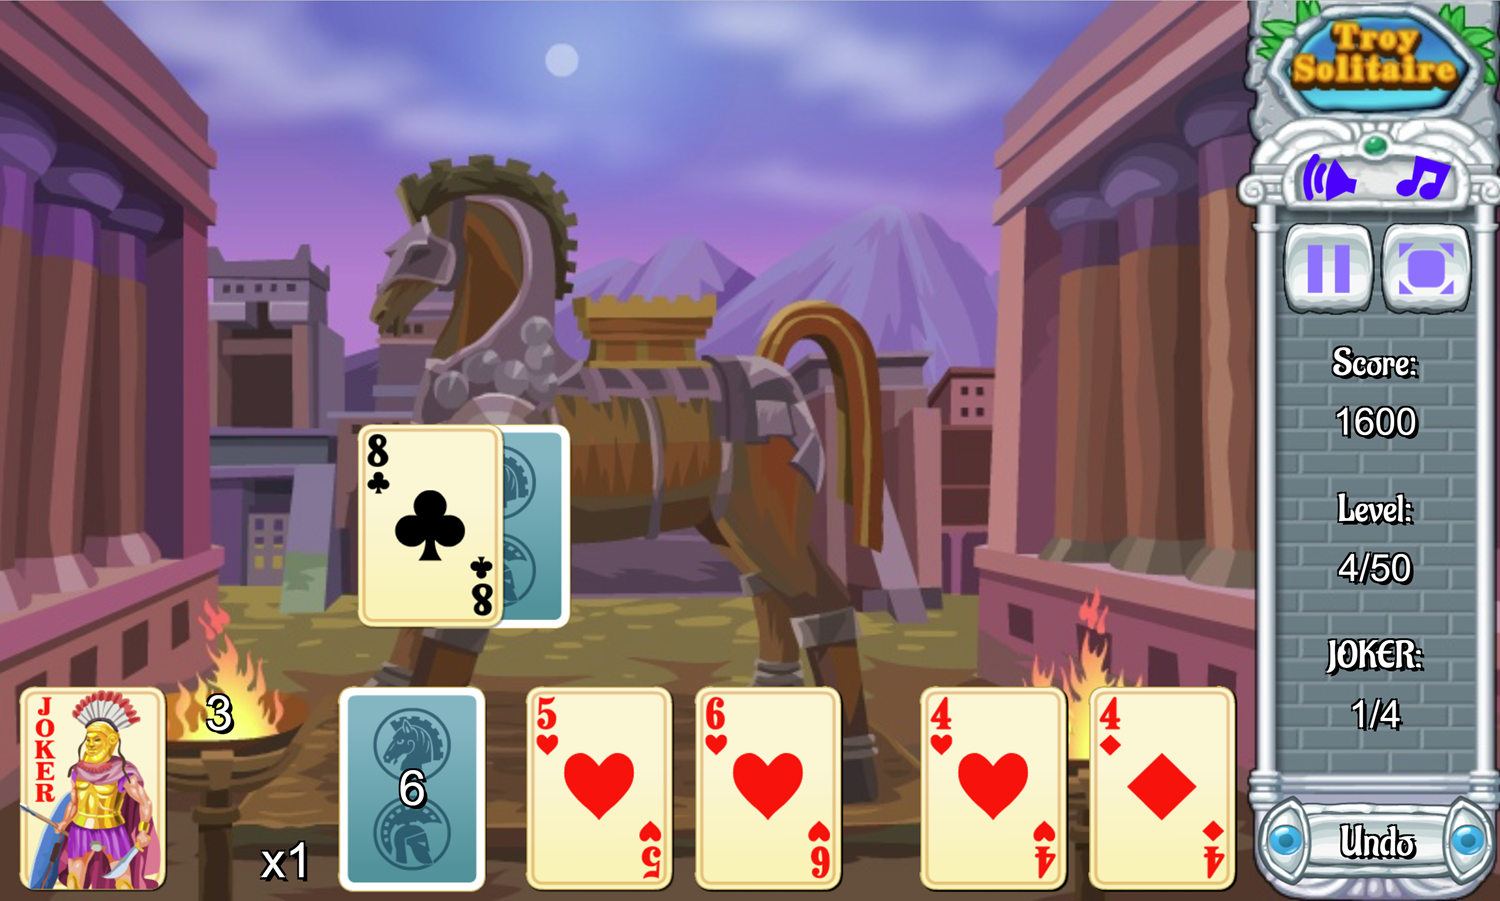 Troy Solitaire Gameplay Screenshot.